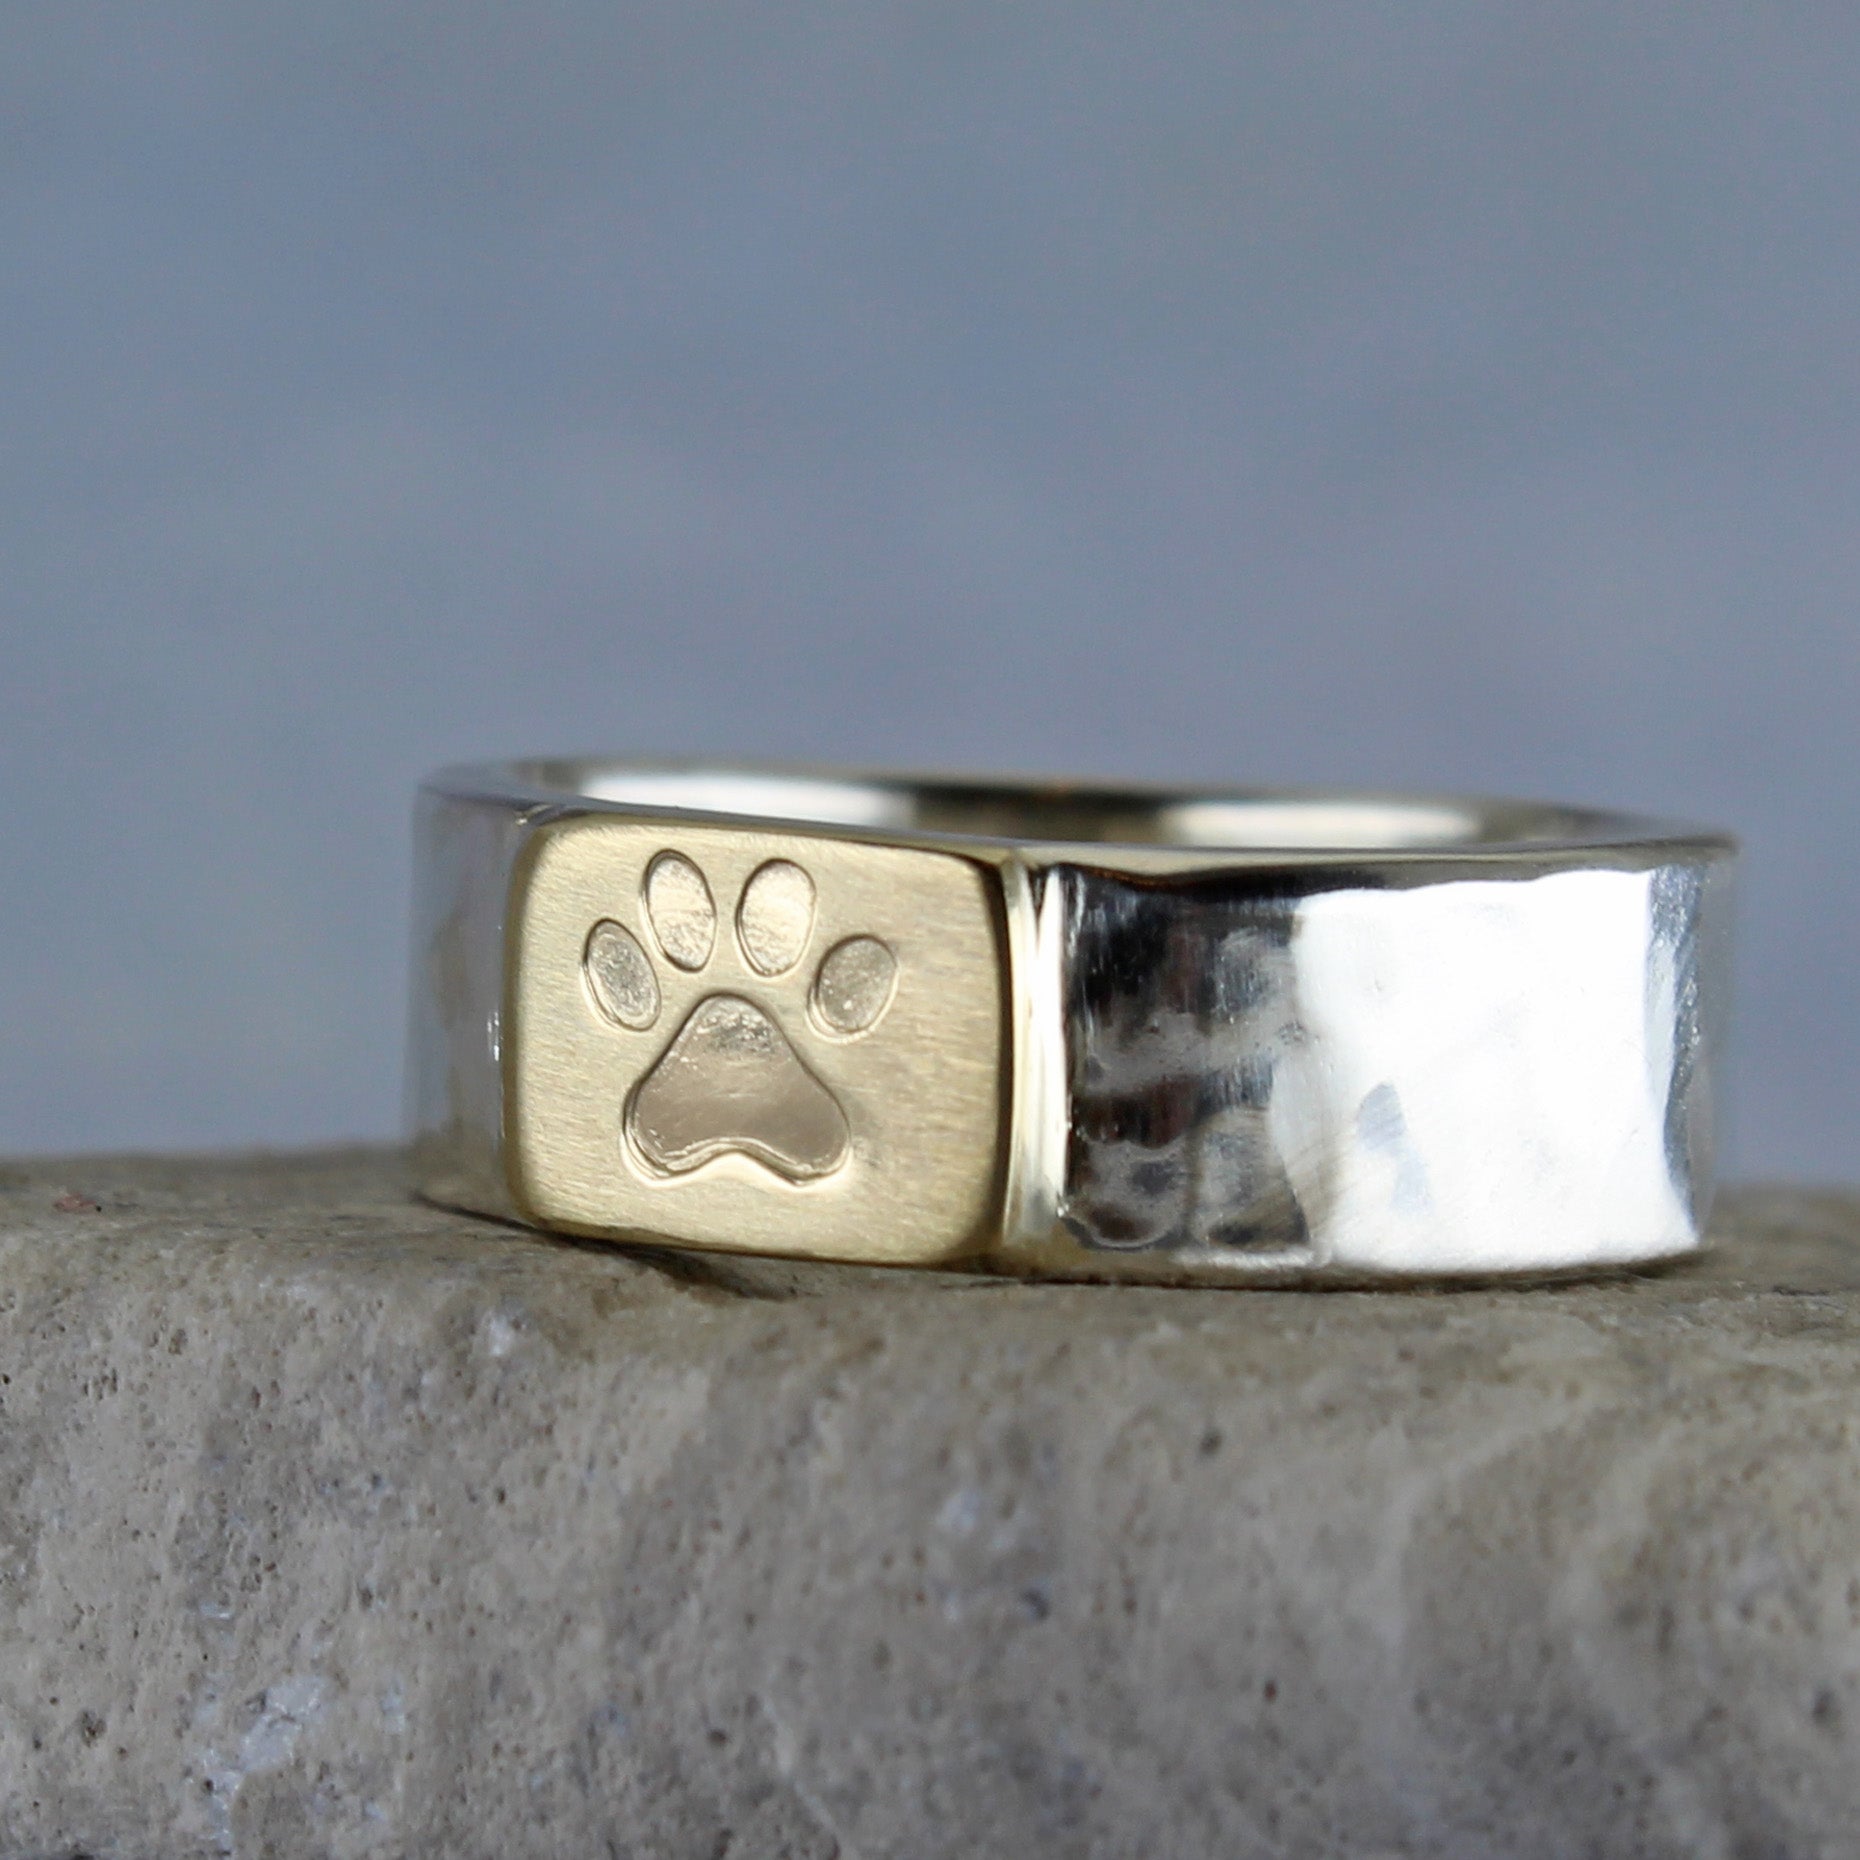 6mm paw print ring made from silver and 10k gold